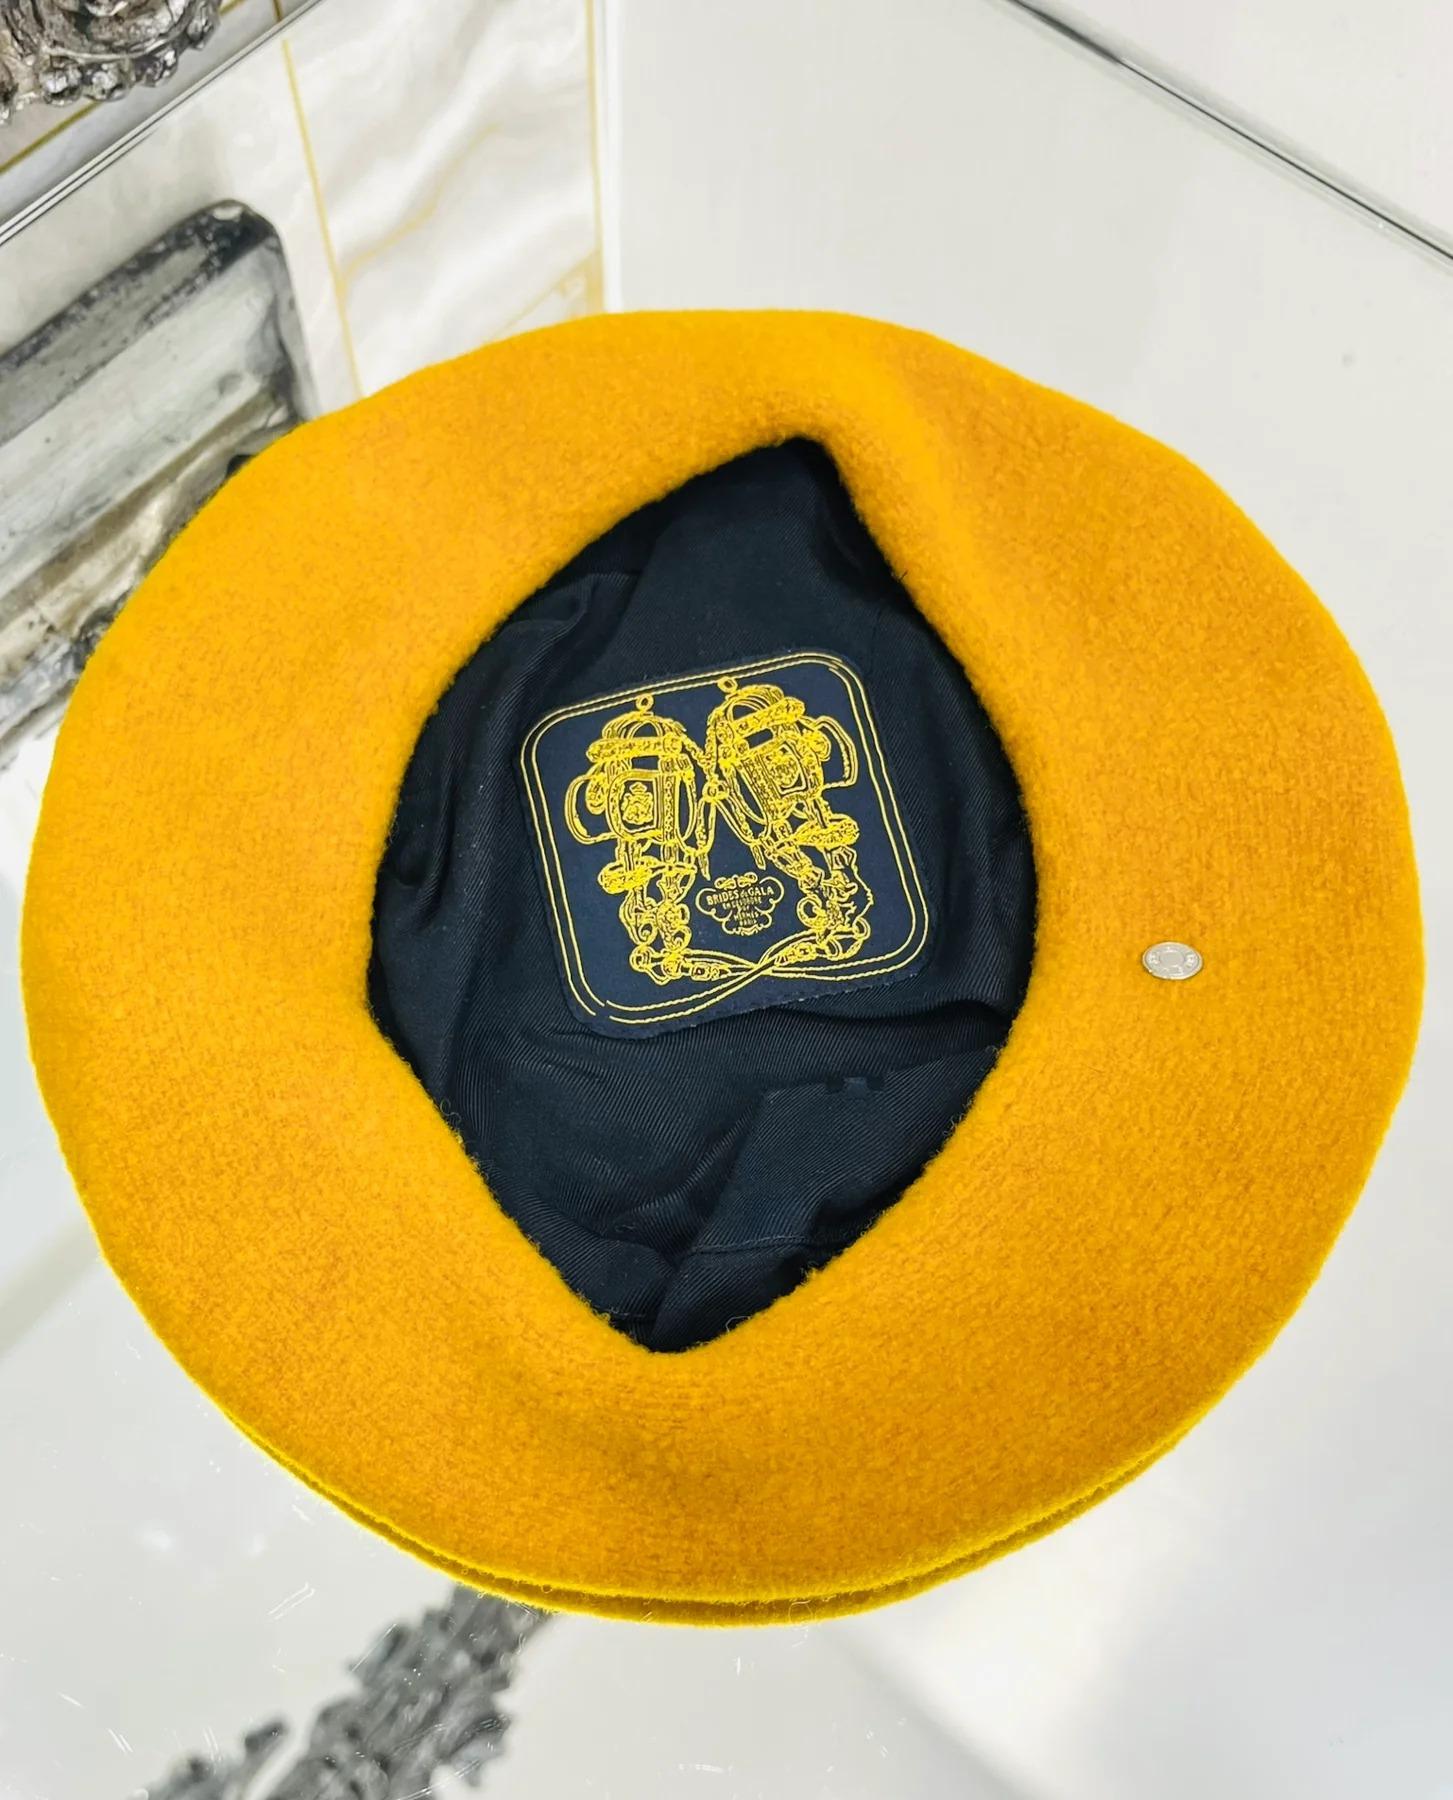 Hermes Merino Wool Bonnie Beret In Excellent Condition For Sale In London, GB